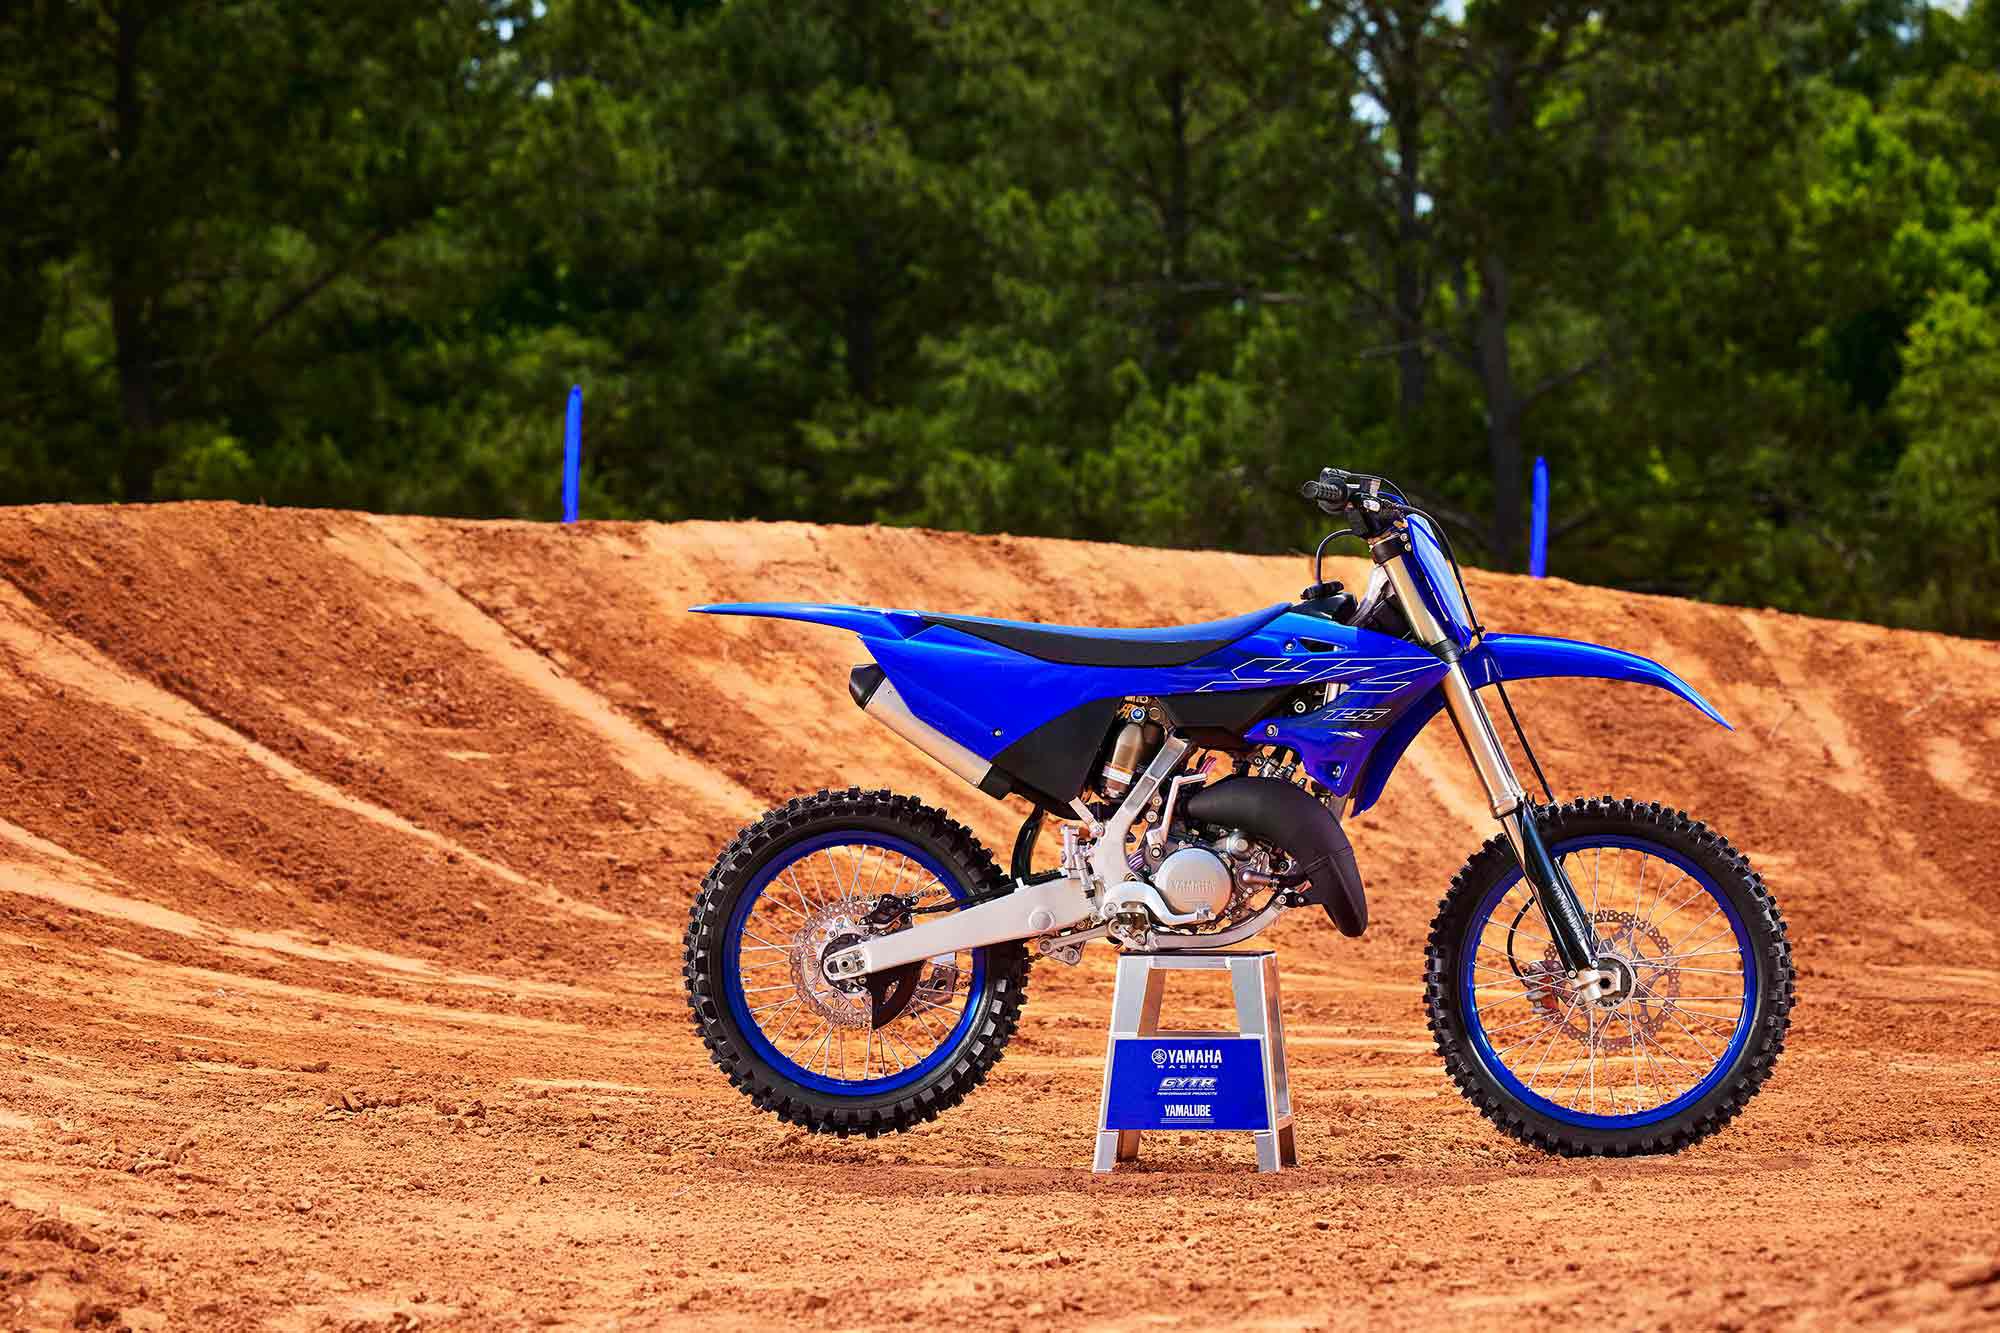 The new YZ125 will be available starting this October at $6,899.